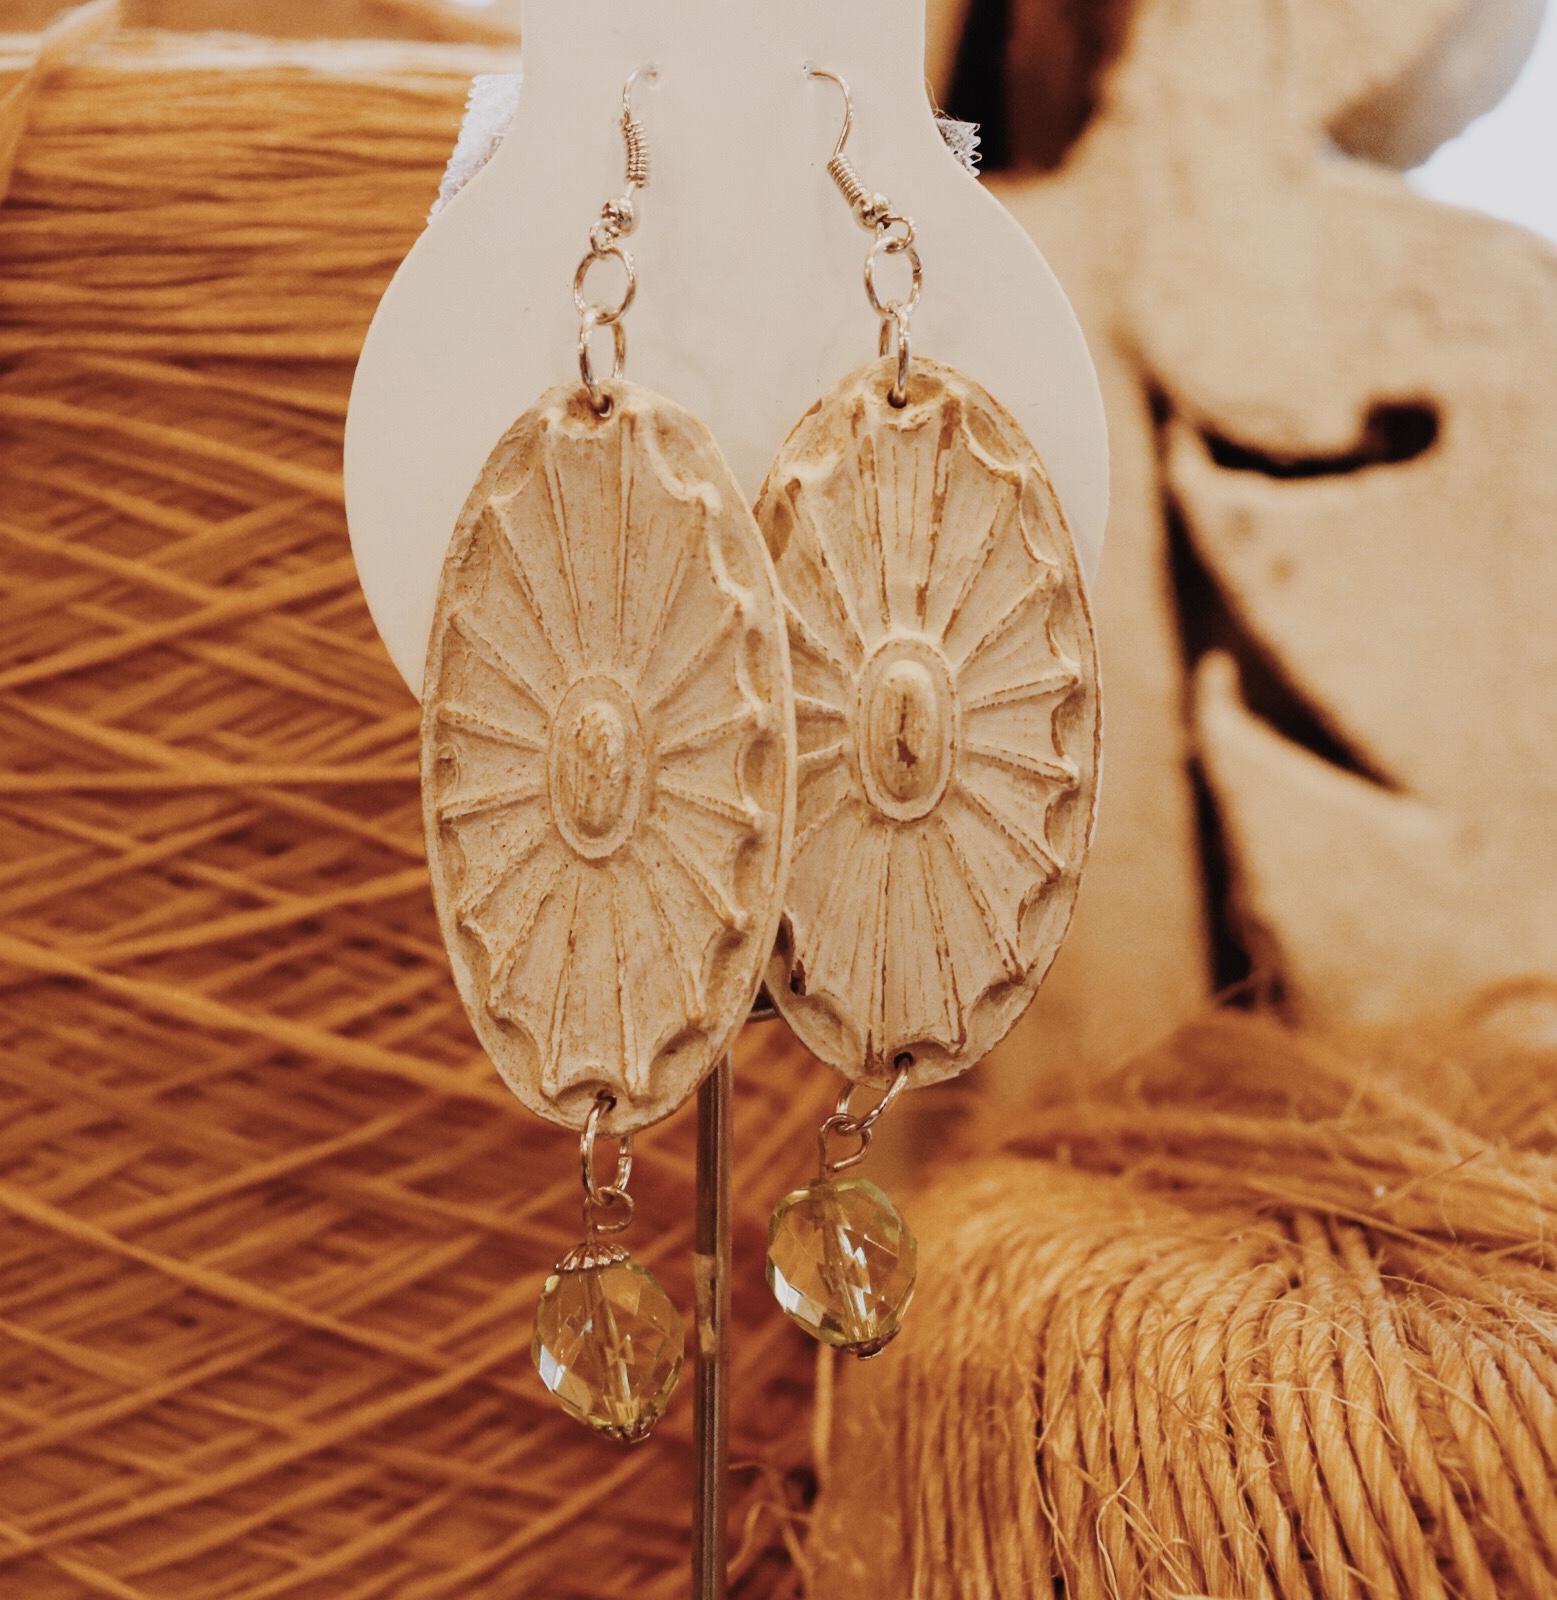 These handmade wooden earrings measure about 3.75 inches long. Please select the color bead you would like.